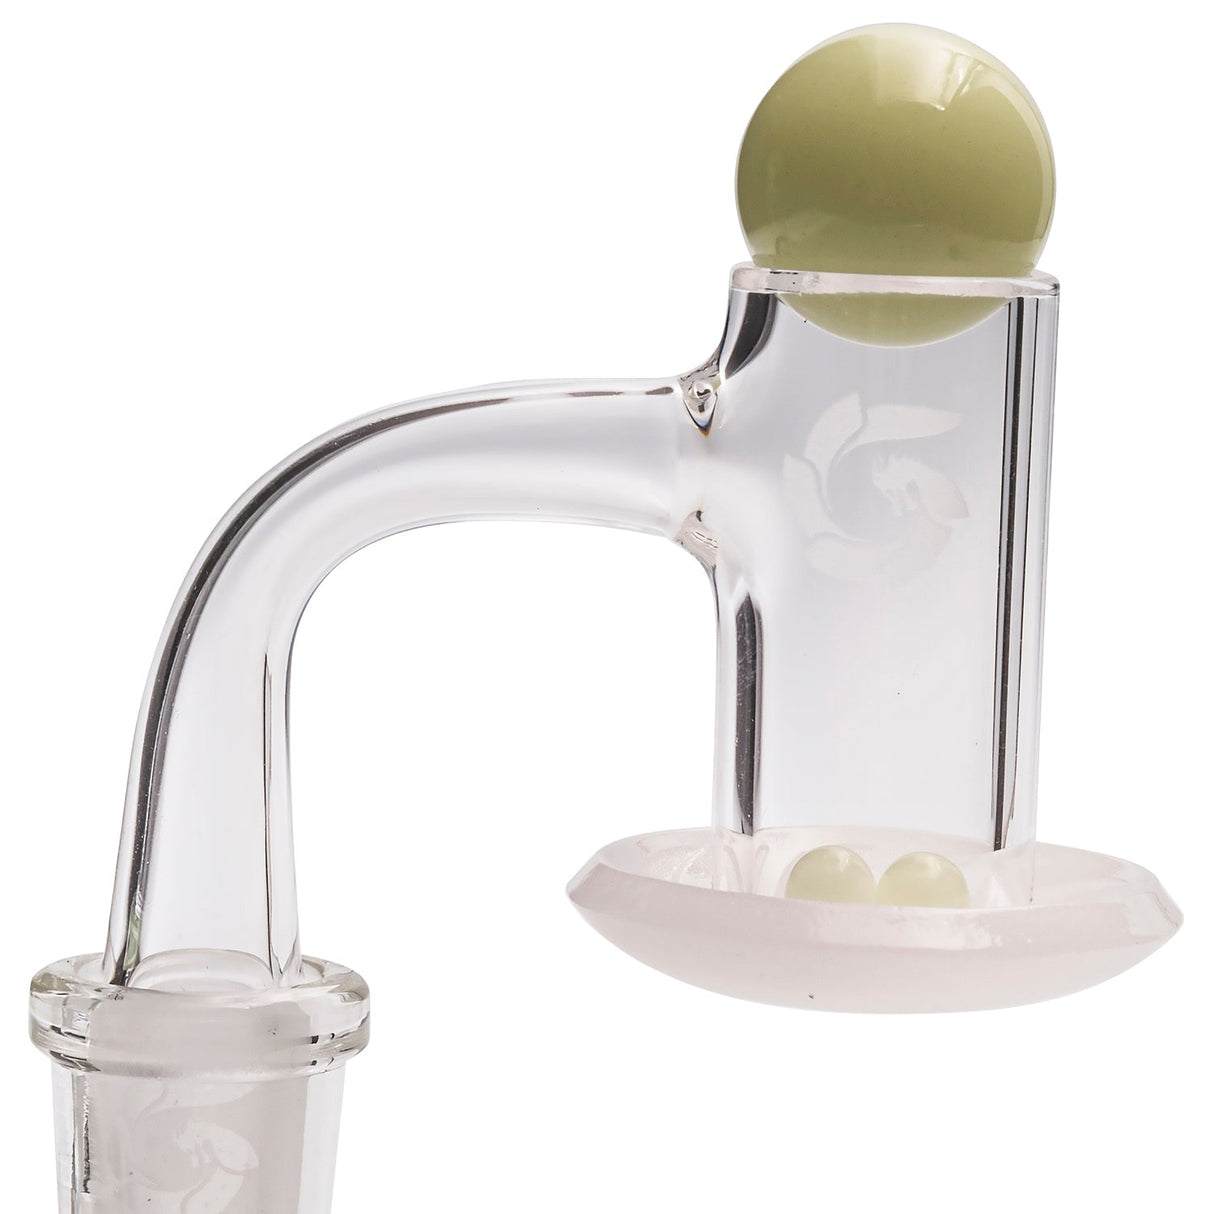 Glasshouse Opaque Base Hurricane Banger with High Air Flow, Male Joint, Side View